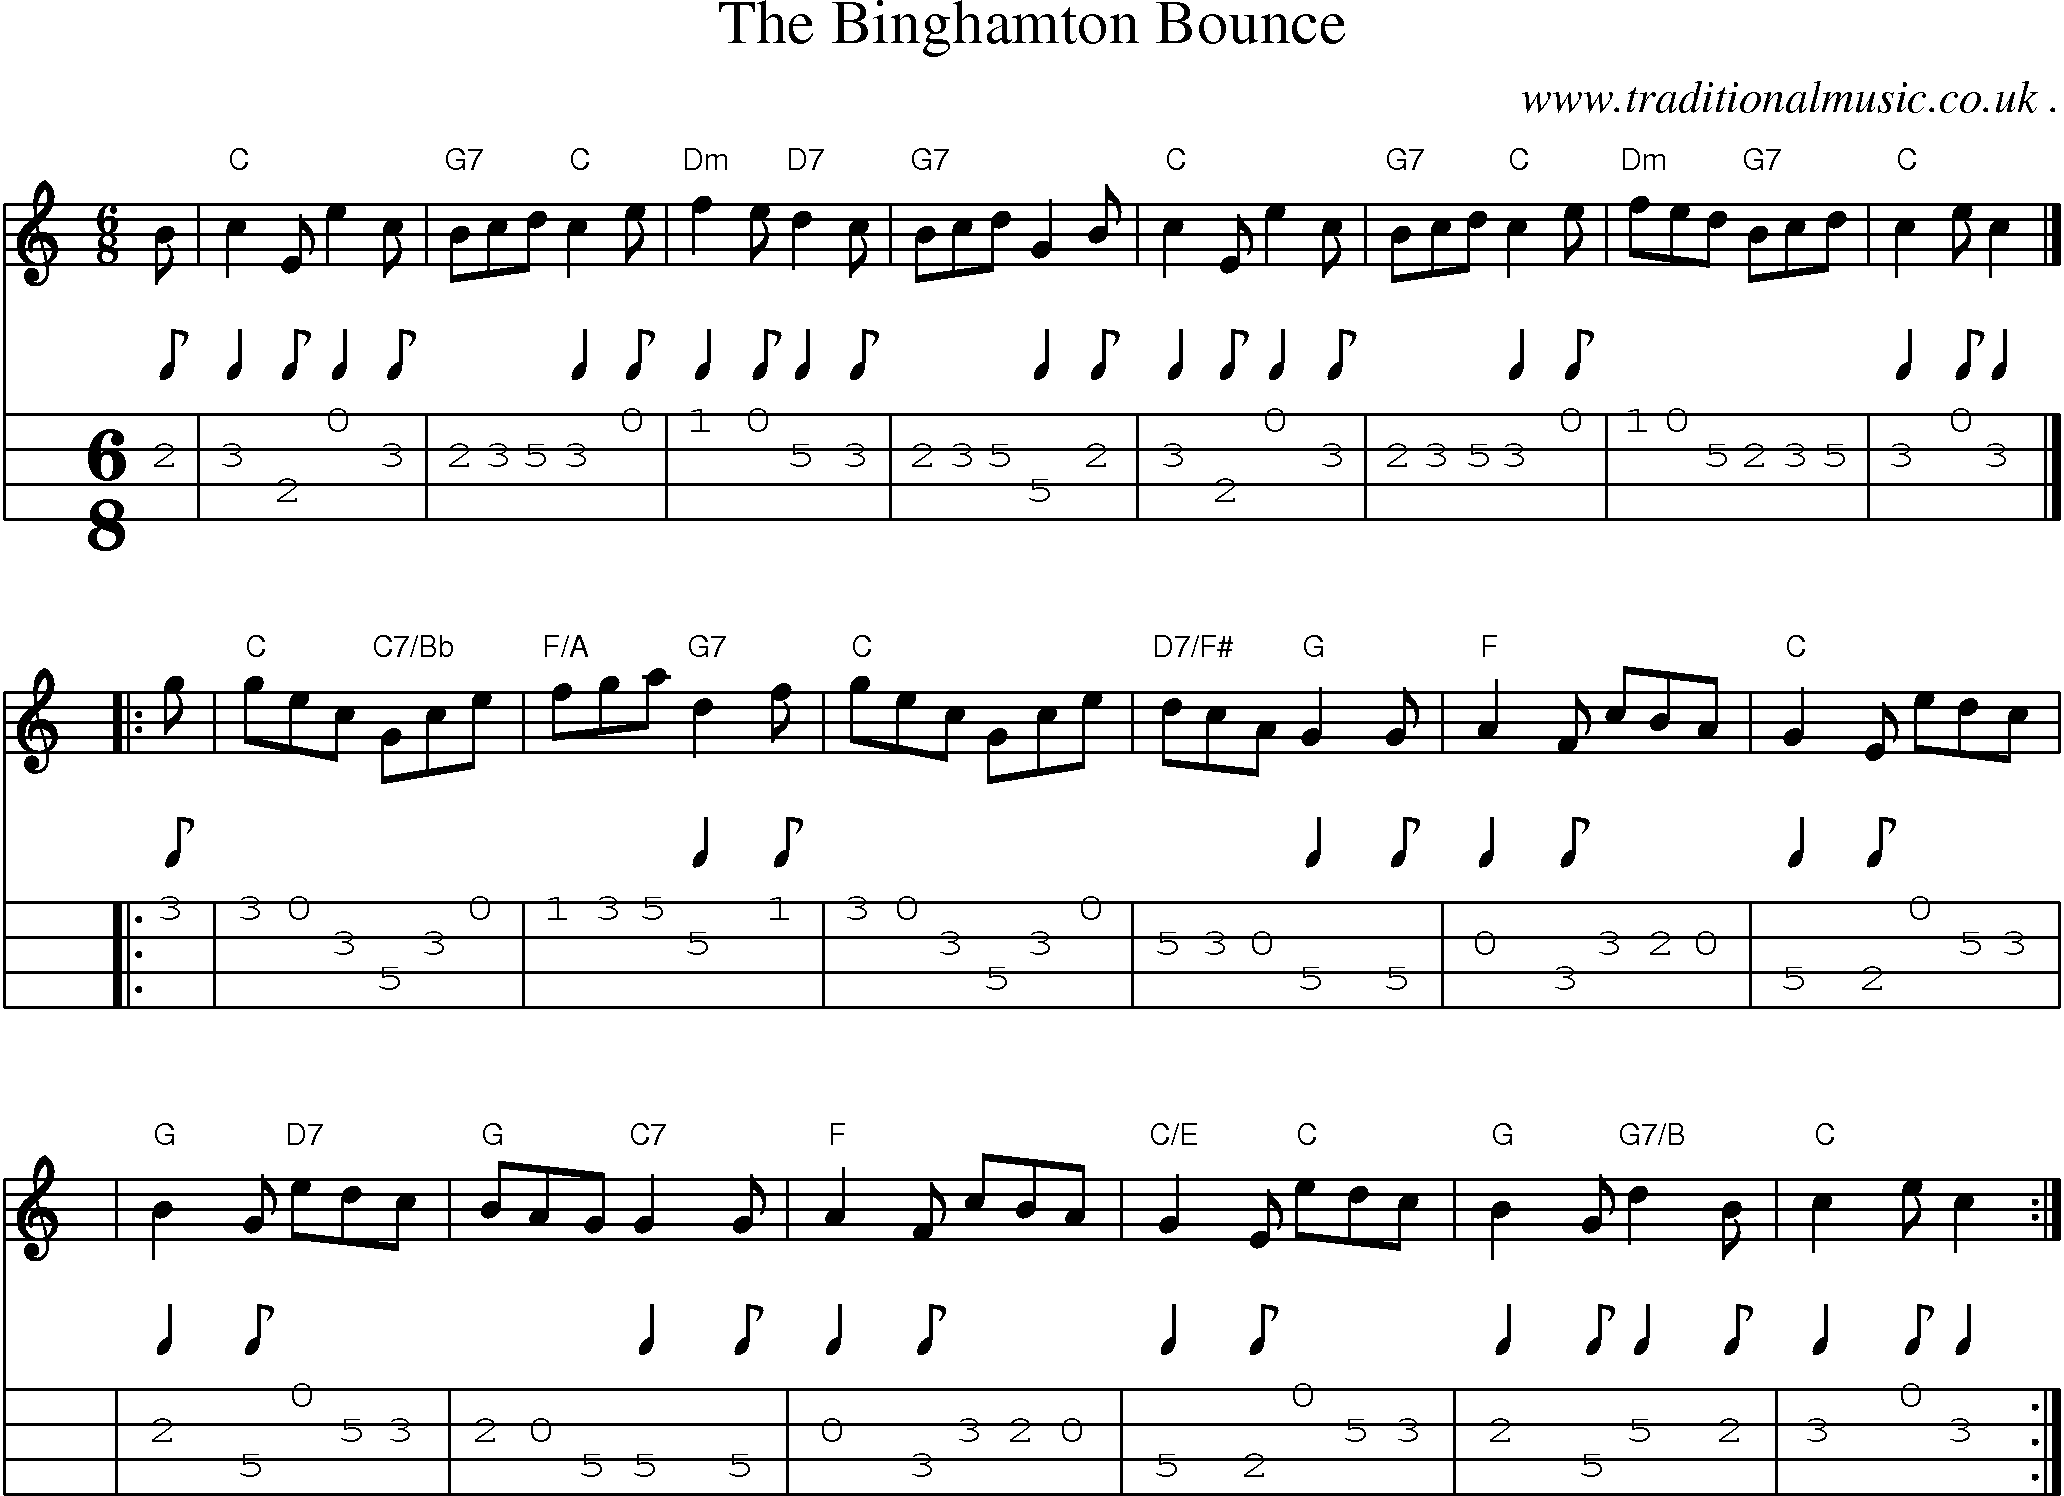 Sheet-music  score, Chords and Mandolin Tabs for The Binghamton Bounce